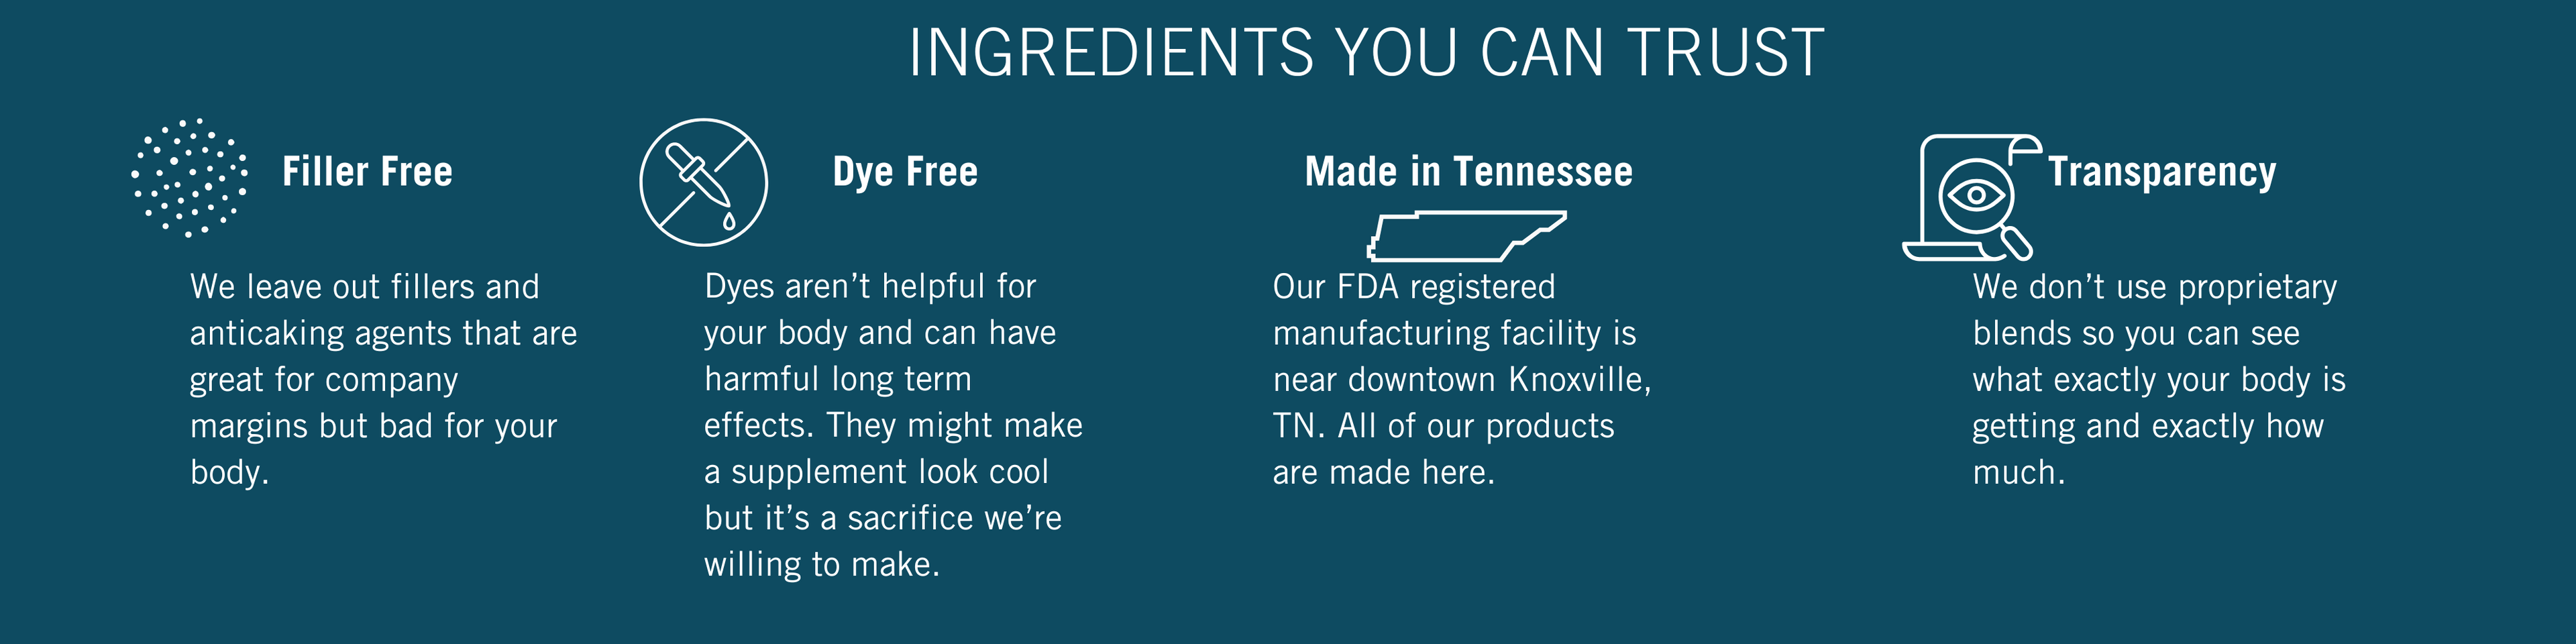 Verawella's statement of ingredients you can trust. Our supplements are free from harmful fillers, anticaking agents, artificial sweeteners, and dyes. All of our products are manufactured in Knoxville, TN. We do not use proprietary blends so you can see exactly what you are getting and exactly how much of it. 